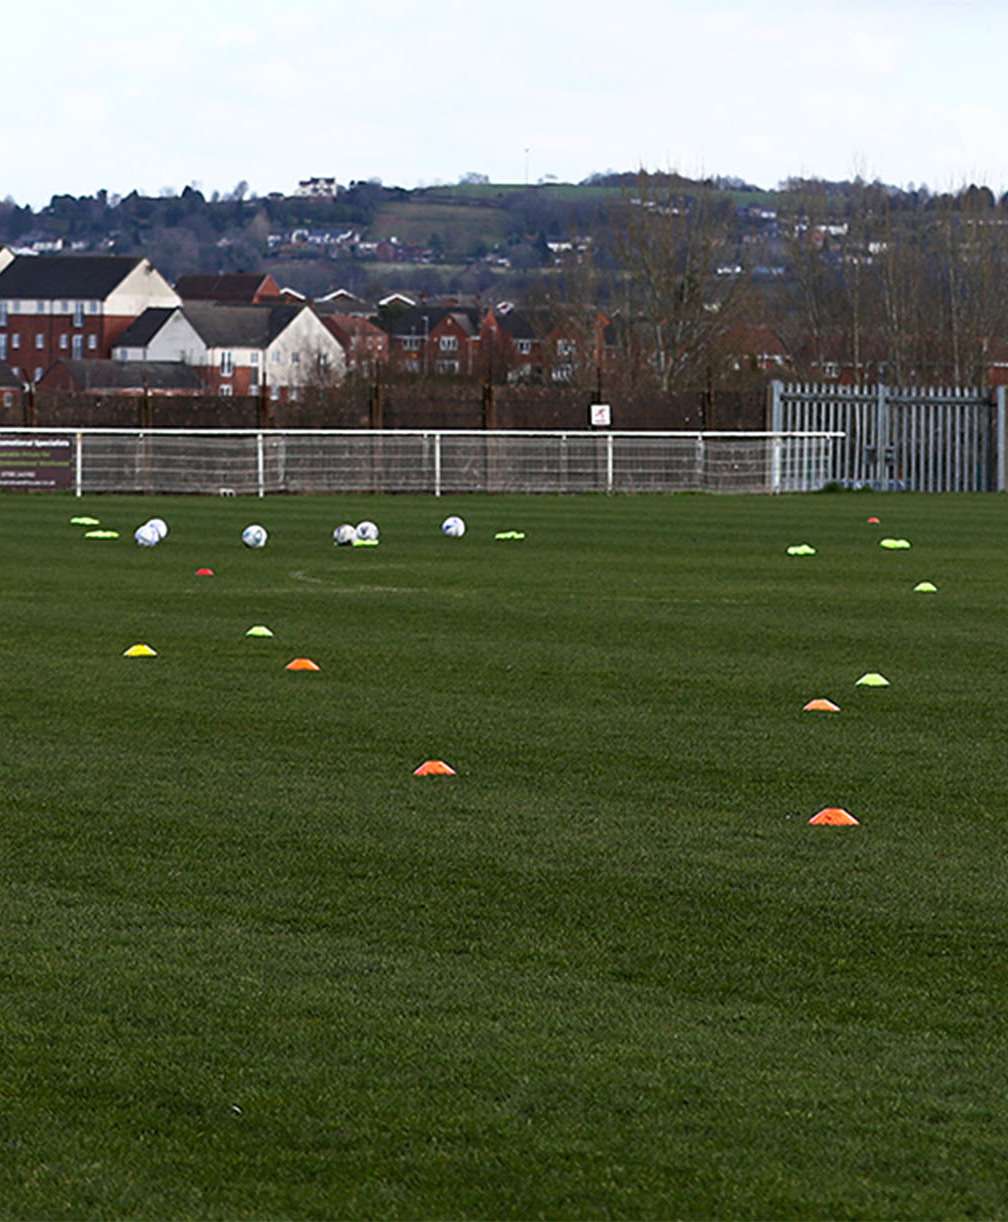 A wide-angle shot showing a full-sized grass football pitch. Cones and footballs are spread out ready for a training session.